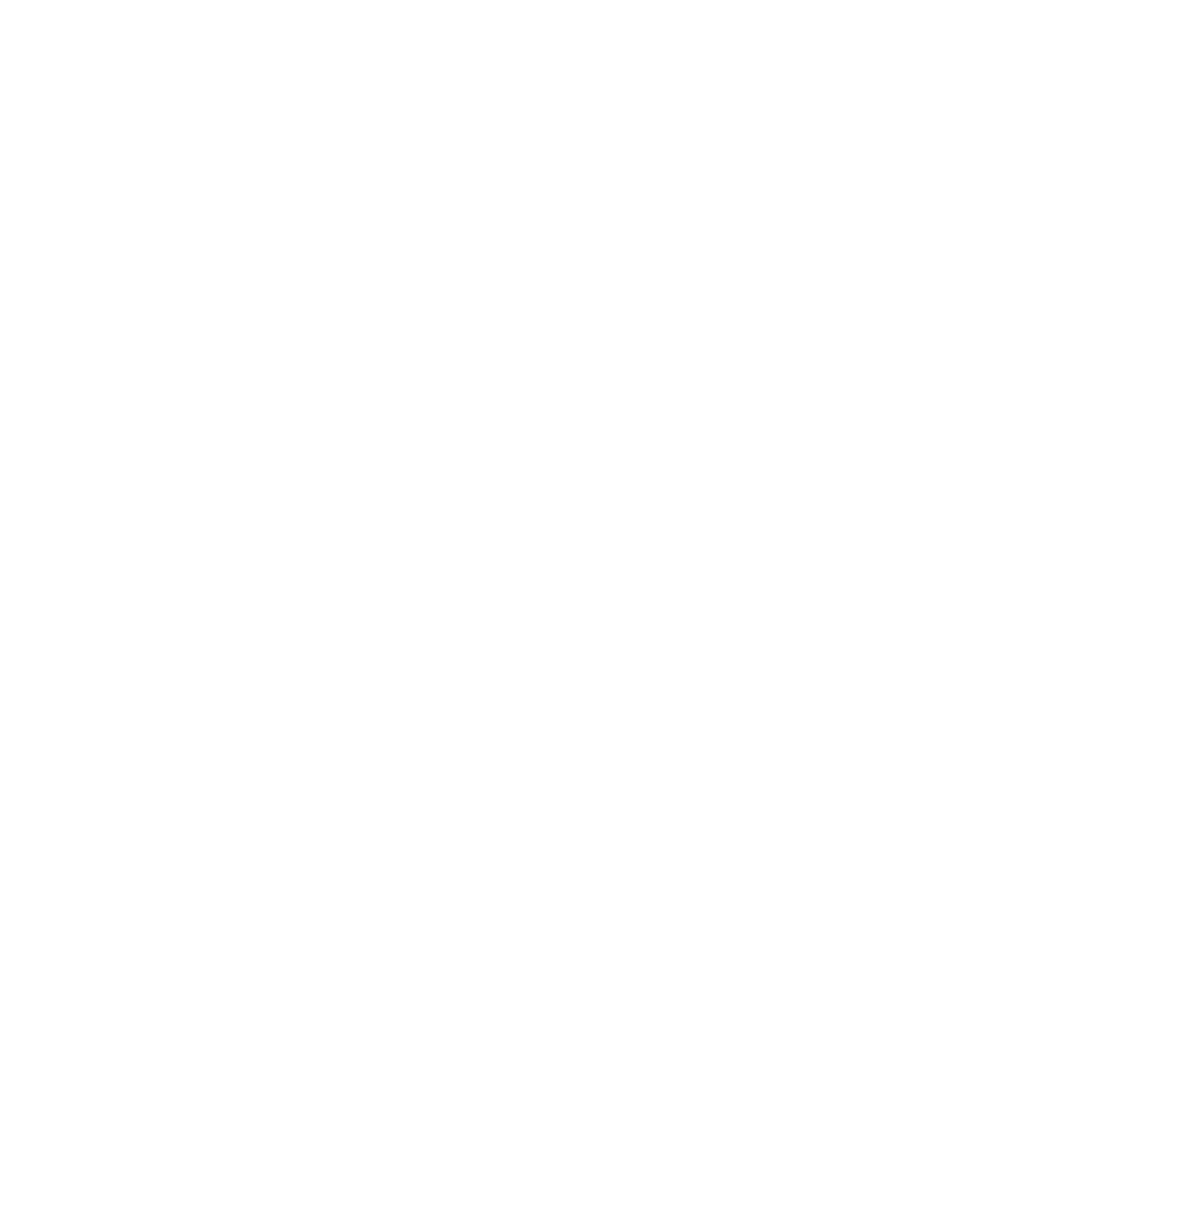 About the awards